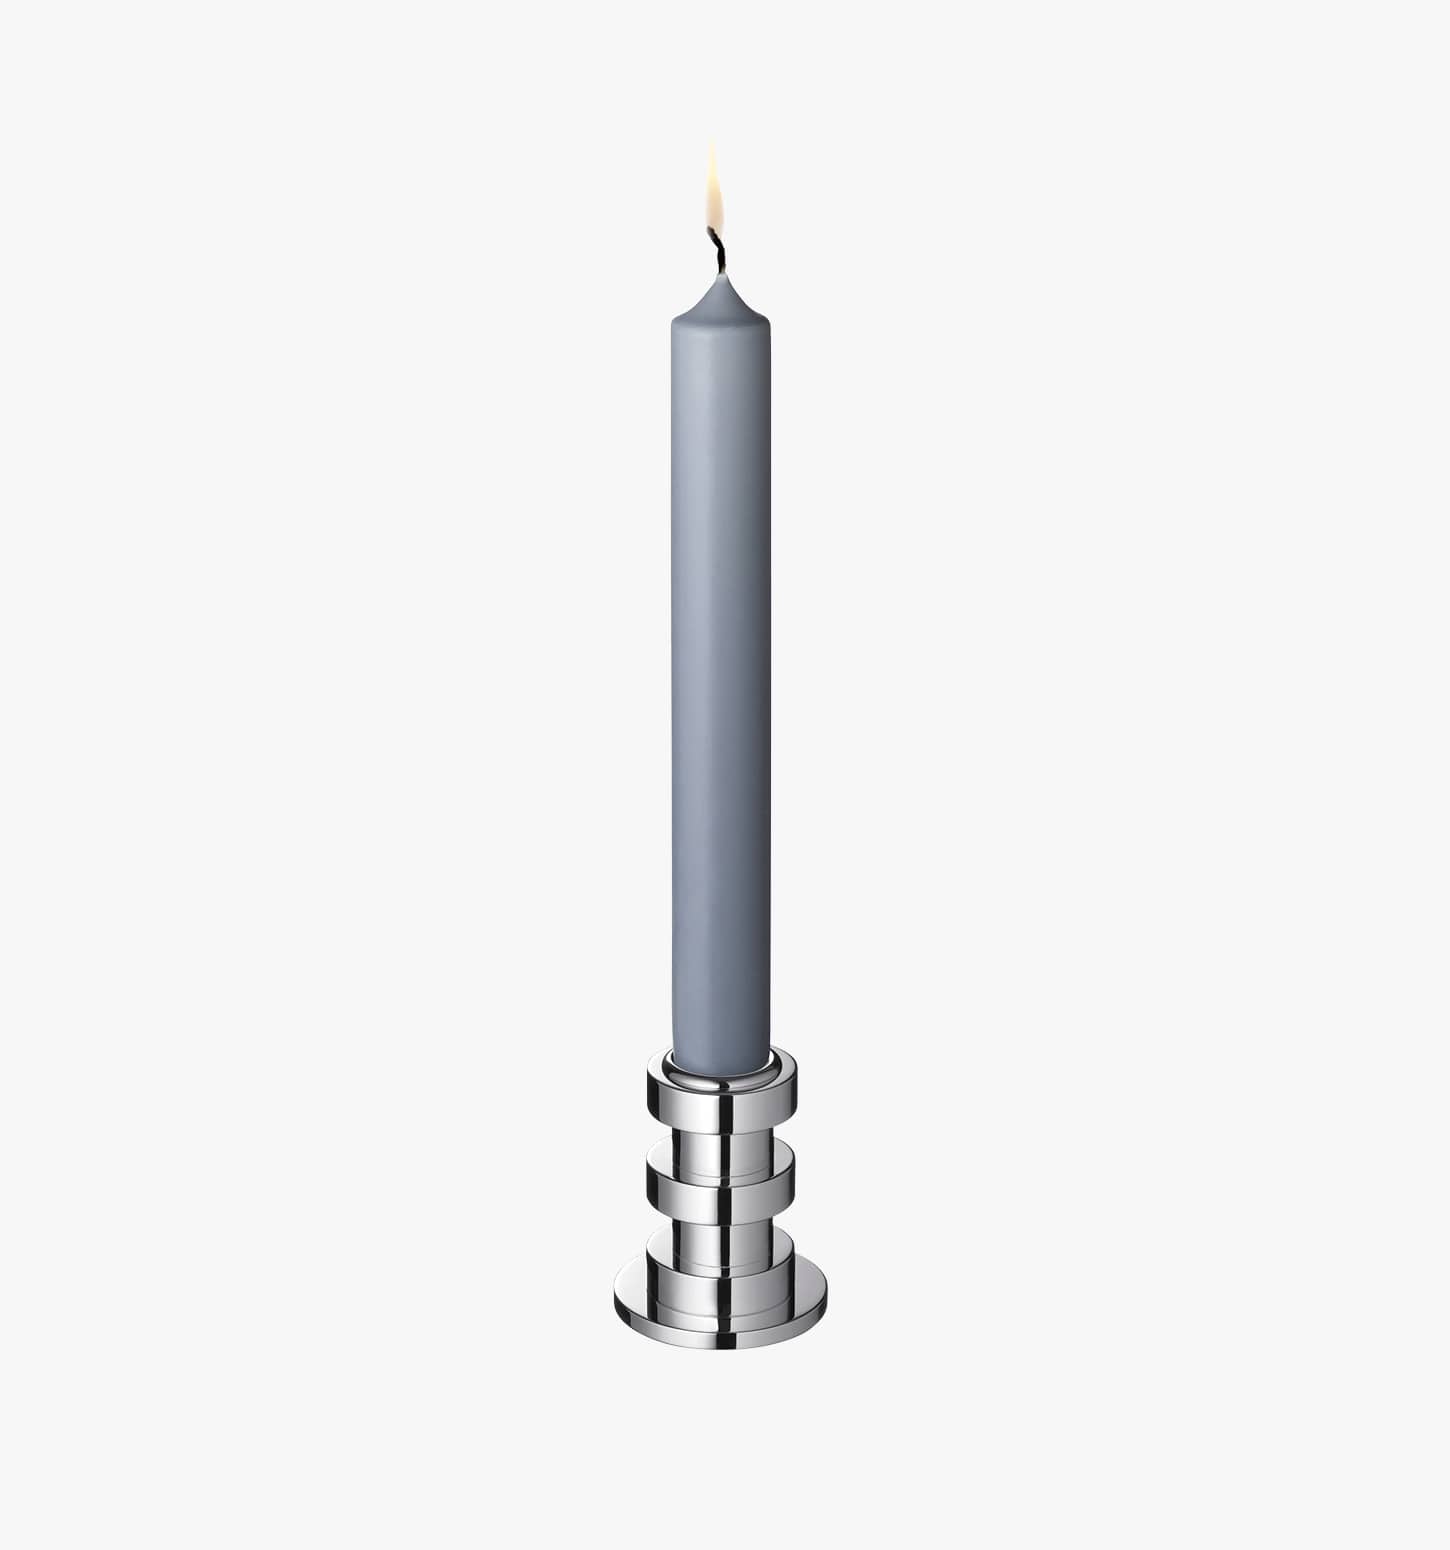 Small candlestick in silver plated from Ruban collection from Puiforcat